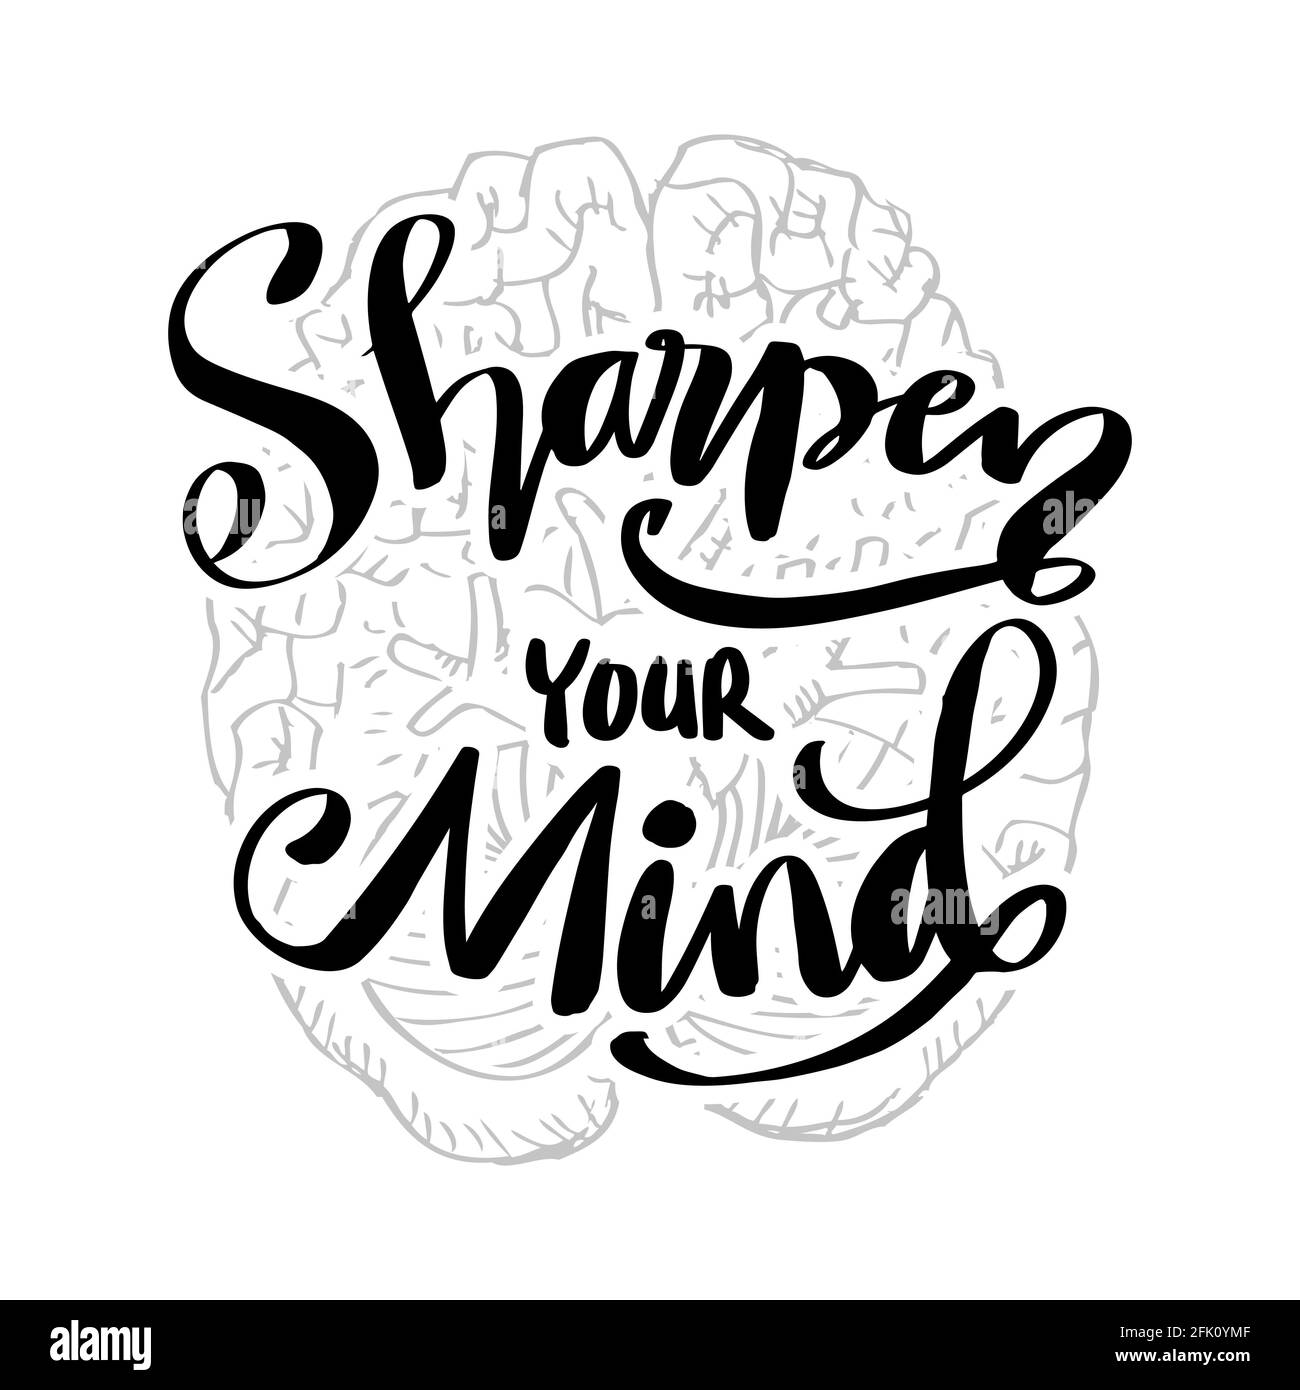 Sharpen your hand lettering. Motivational quote. Stock Photo